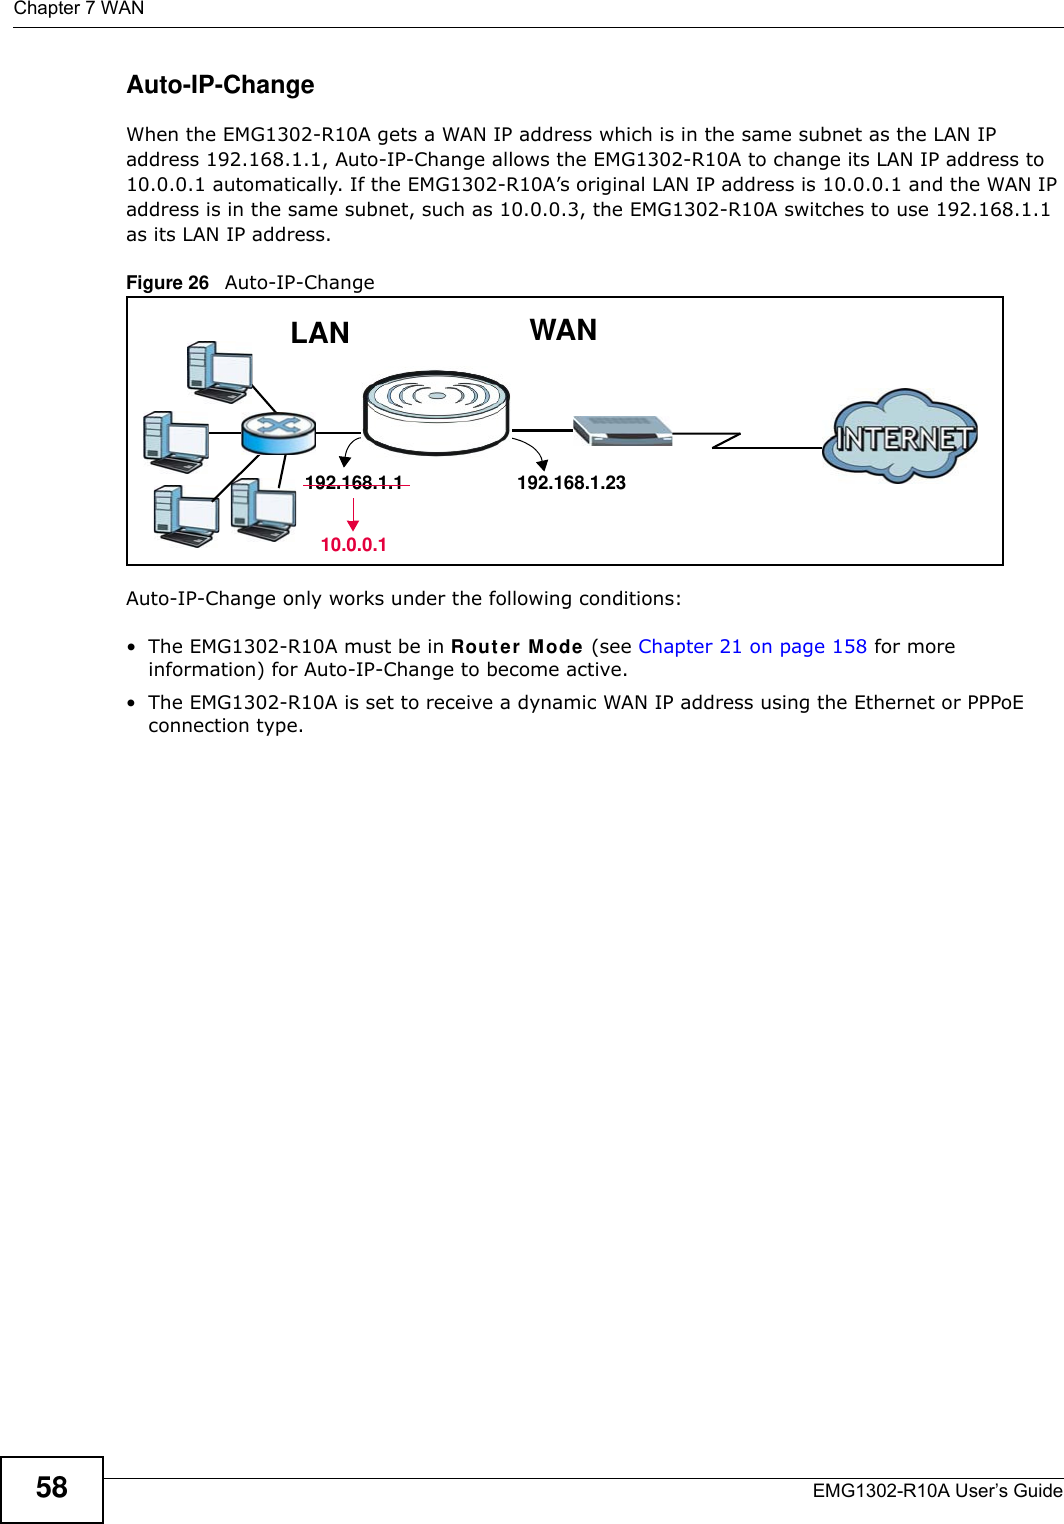 Chapter 7 WANEMG1302-R10A User’s Guide58Auto-IP-ChangeWhen the EMG1302-R10A gets a WAN IP address which is in the same subnet as the LAN IP address 192.168.1.1, Auto-IP-Change allows the EMG1302-R10A to change its LAN IP address to 10.0.0.1 automatically. If the EMG1302-R10A’s original LAN IP address is 10.0.0.1 and the WAN IP address is in the same subnet, such as 10.0.0.3, the EMG1302-R10A switches to use 192.168.1.1 as its LAN IP address.Figure 26   Auto-IP-Change Auto-IP-Change only works under the following conditions:• The EMG1302-R10A must be in Router  Mode (see Chapter 21 on page 158 for more information) for Auto-IP-Change to become active. • The EMG1302-R10A is set to receive a dynamic WAN IP address using the Ethernet or PPPoE connection type.WANLAN192.168.1.23192.168.1.110.0.0.1